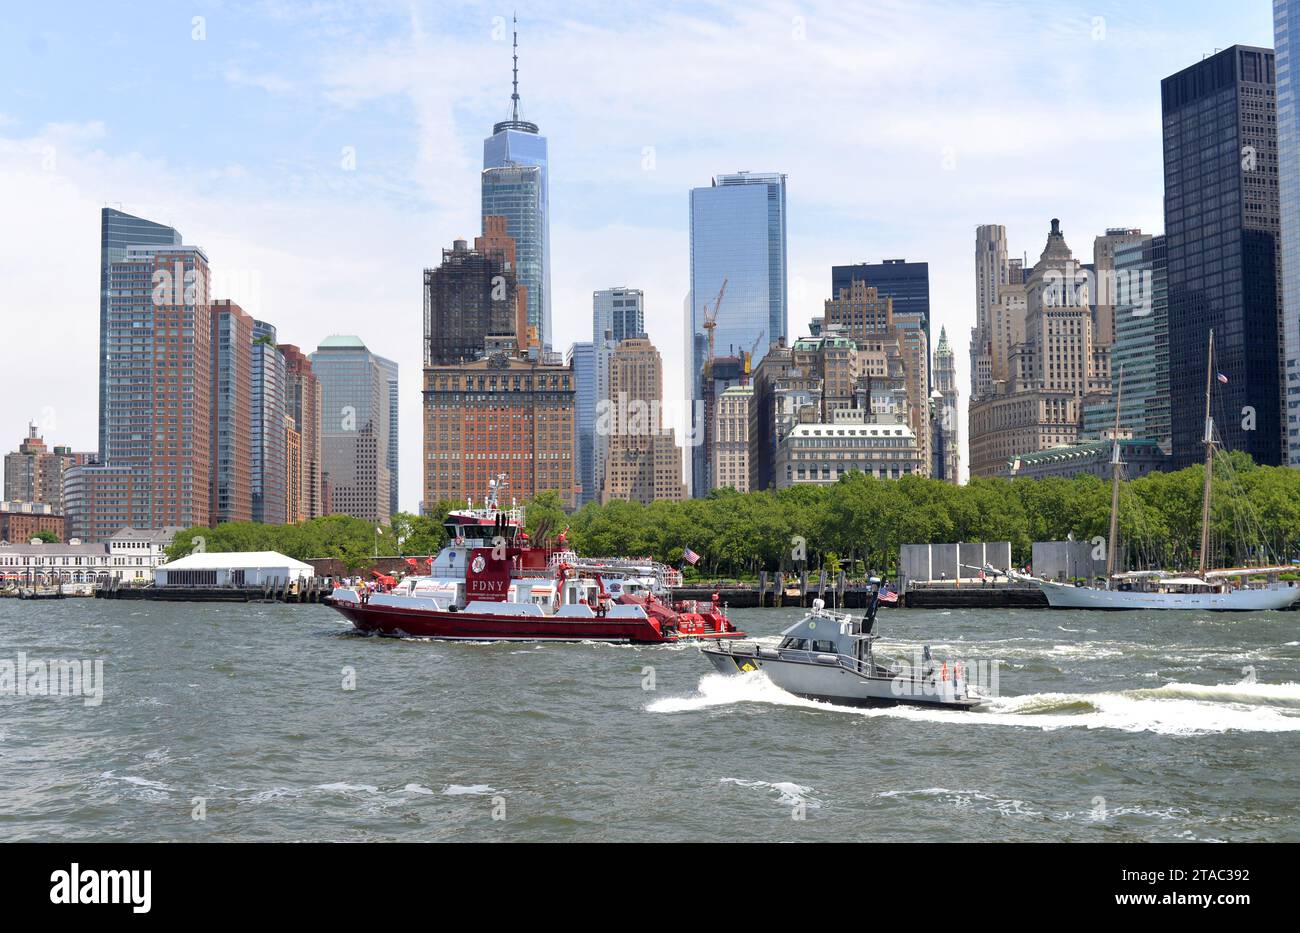 New York, USA - June 9, 2018: Fireboat of FDNY moving near the financial district in lower Manhattan, New York, USA Stock Photo